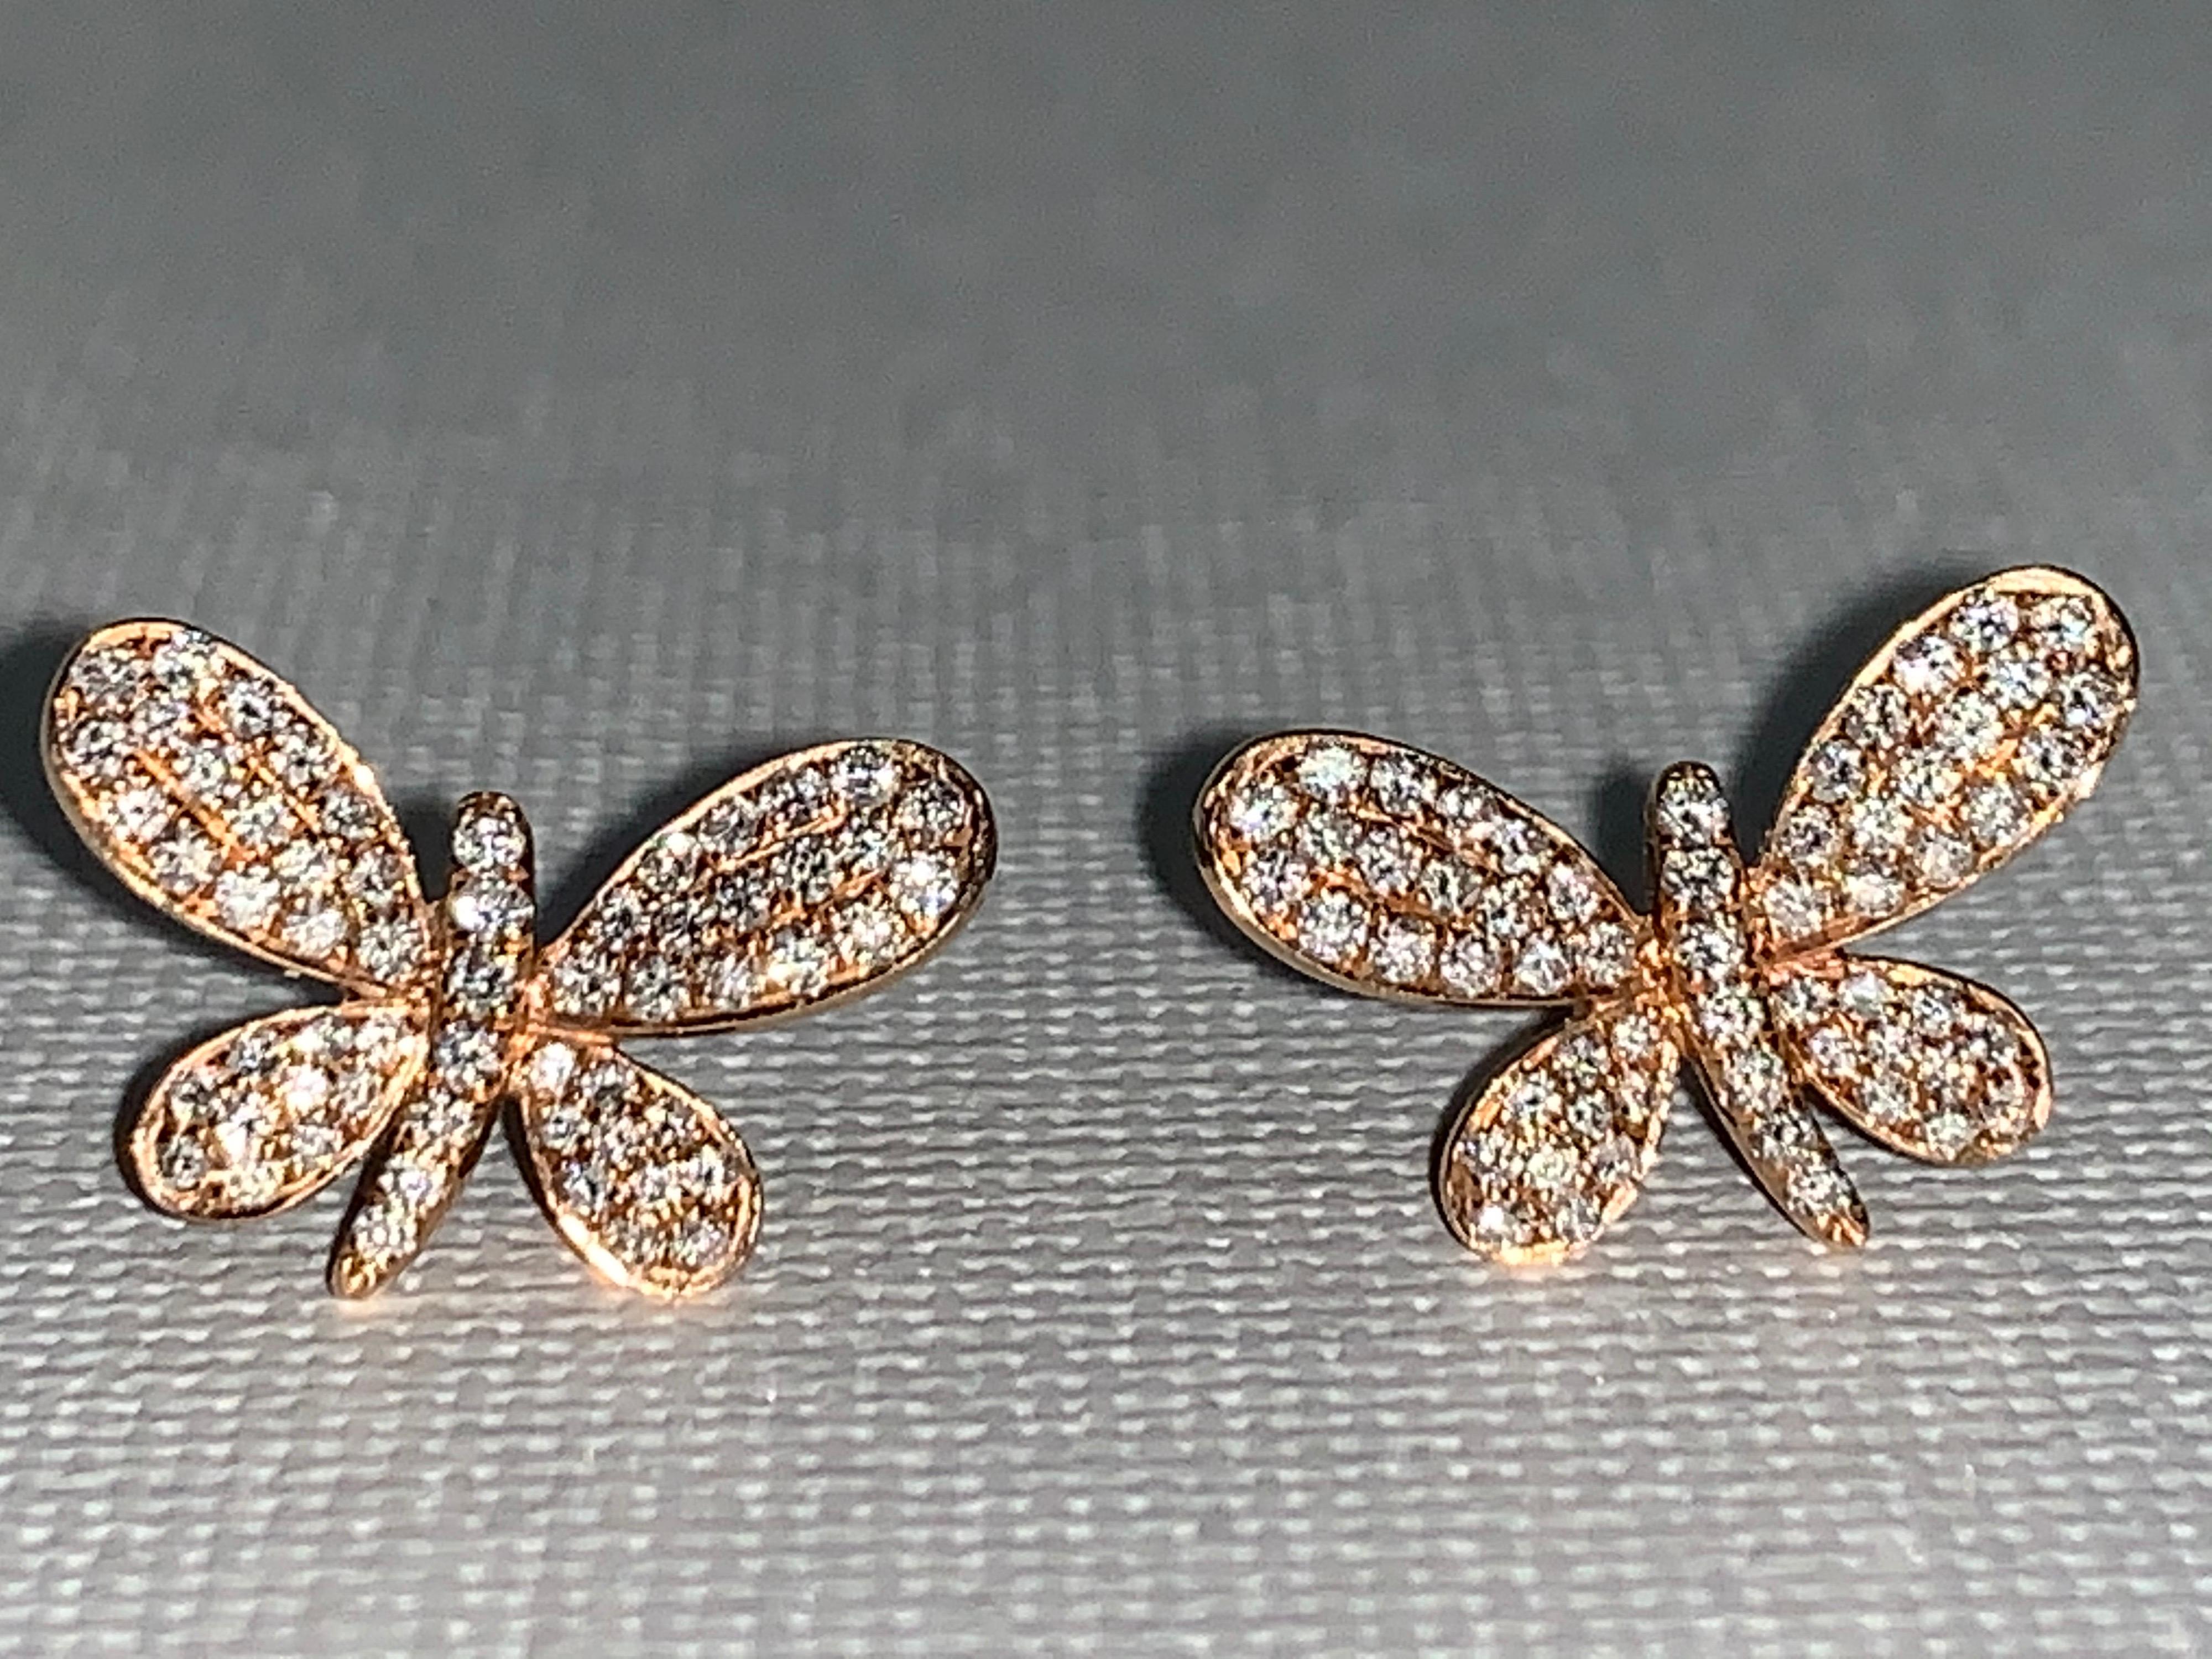 White Diamond, Rose Gold, Dragonfly Earrings

Featuring a pair of White Diamond Dragonfly Earrings with a total weight of 0.5 carats, set in 18K Rose Gold.

This one-of-a-kind pair of earrings was created by hand and in CAD, Computer Aided Design.